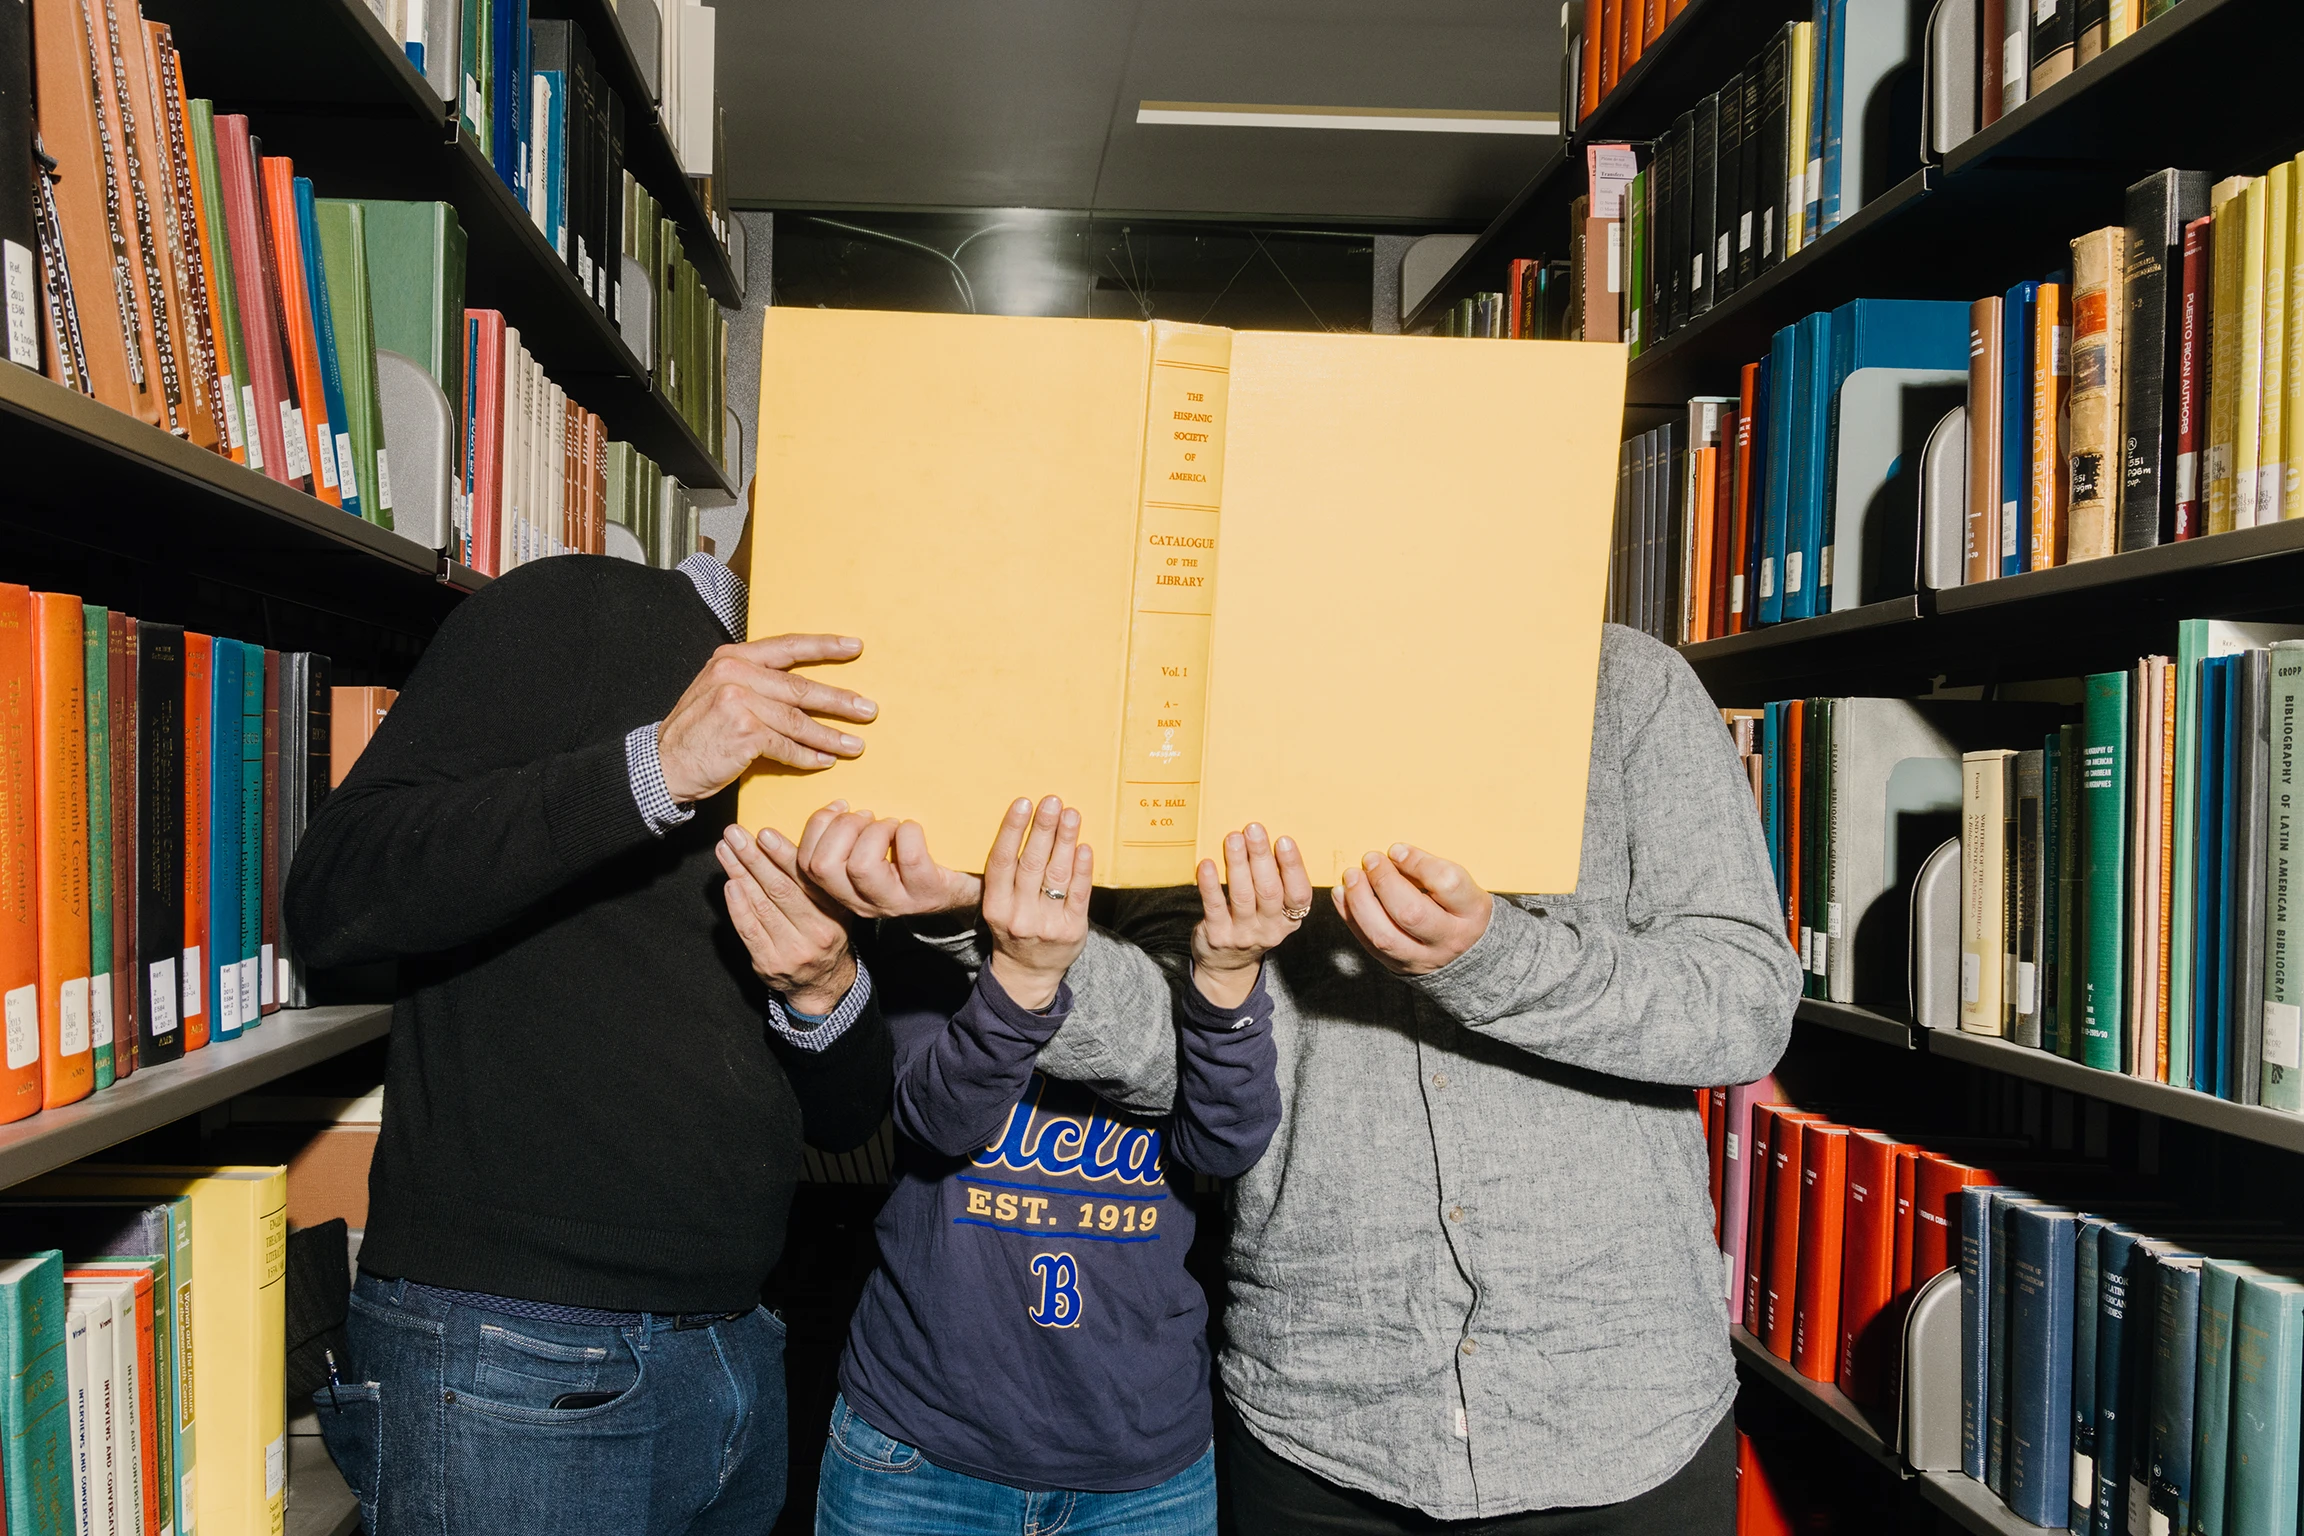 Three people stand in a library with shelves on either side of the group. Together, they hold a book in front of their faces so they are not visible to the camera.